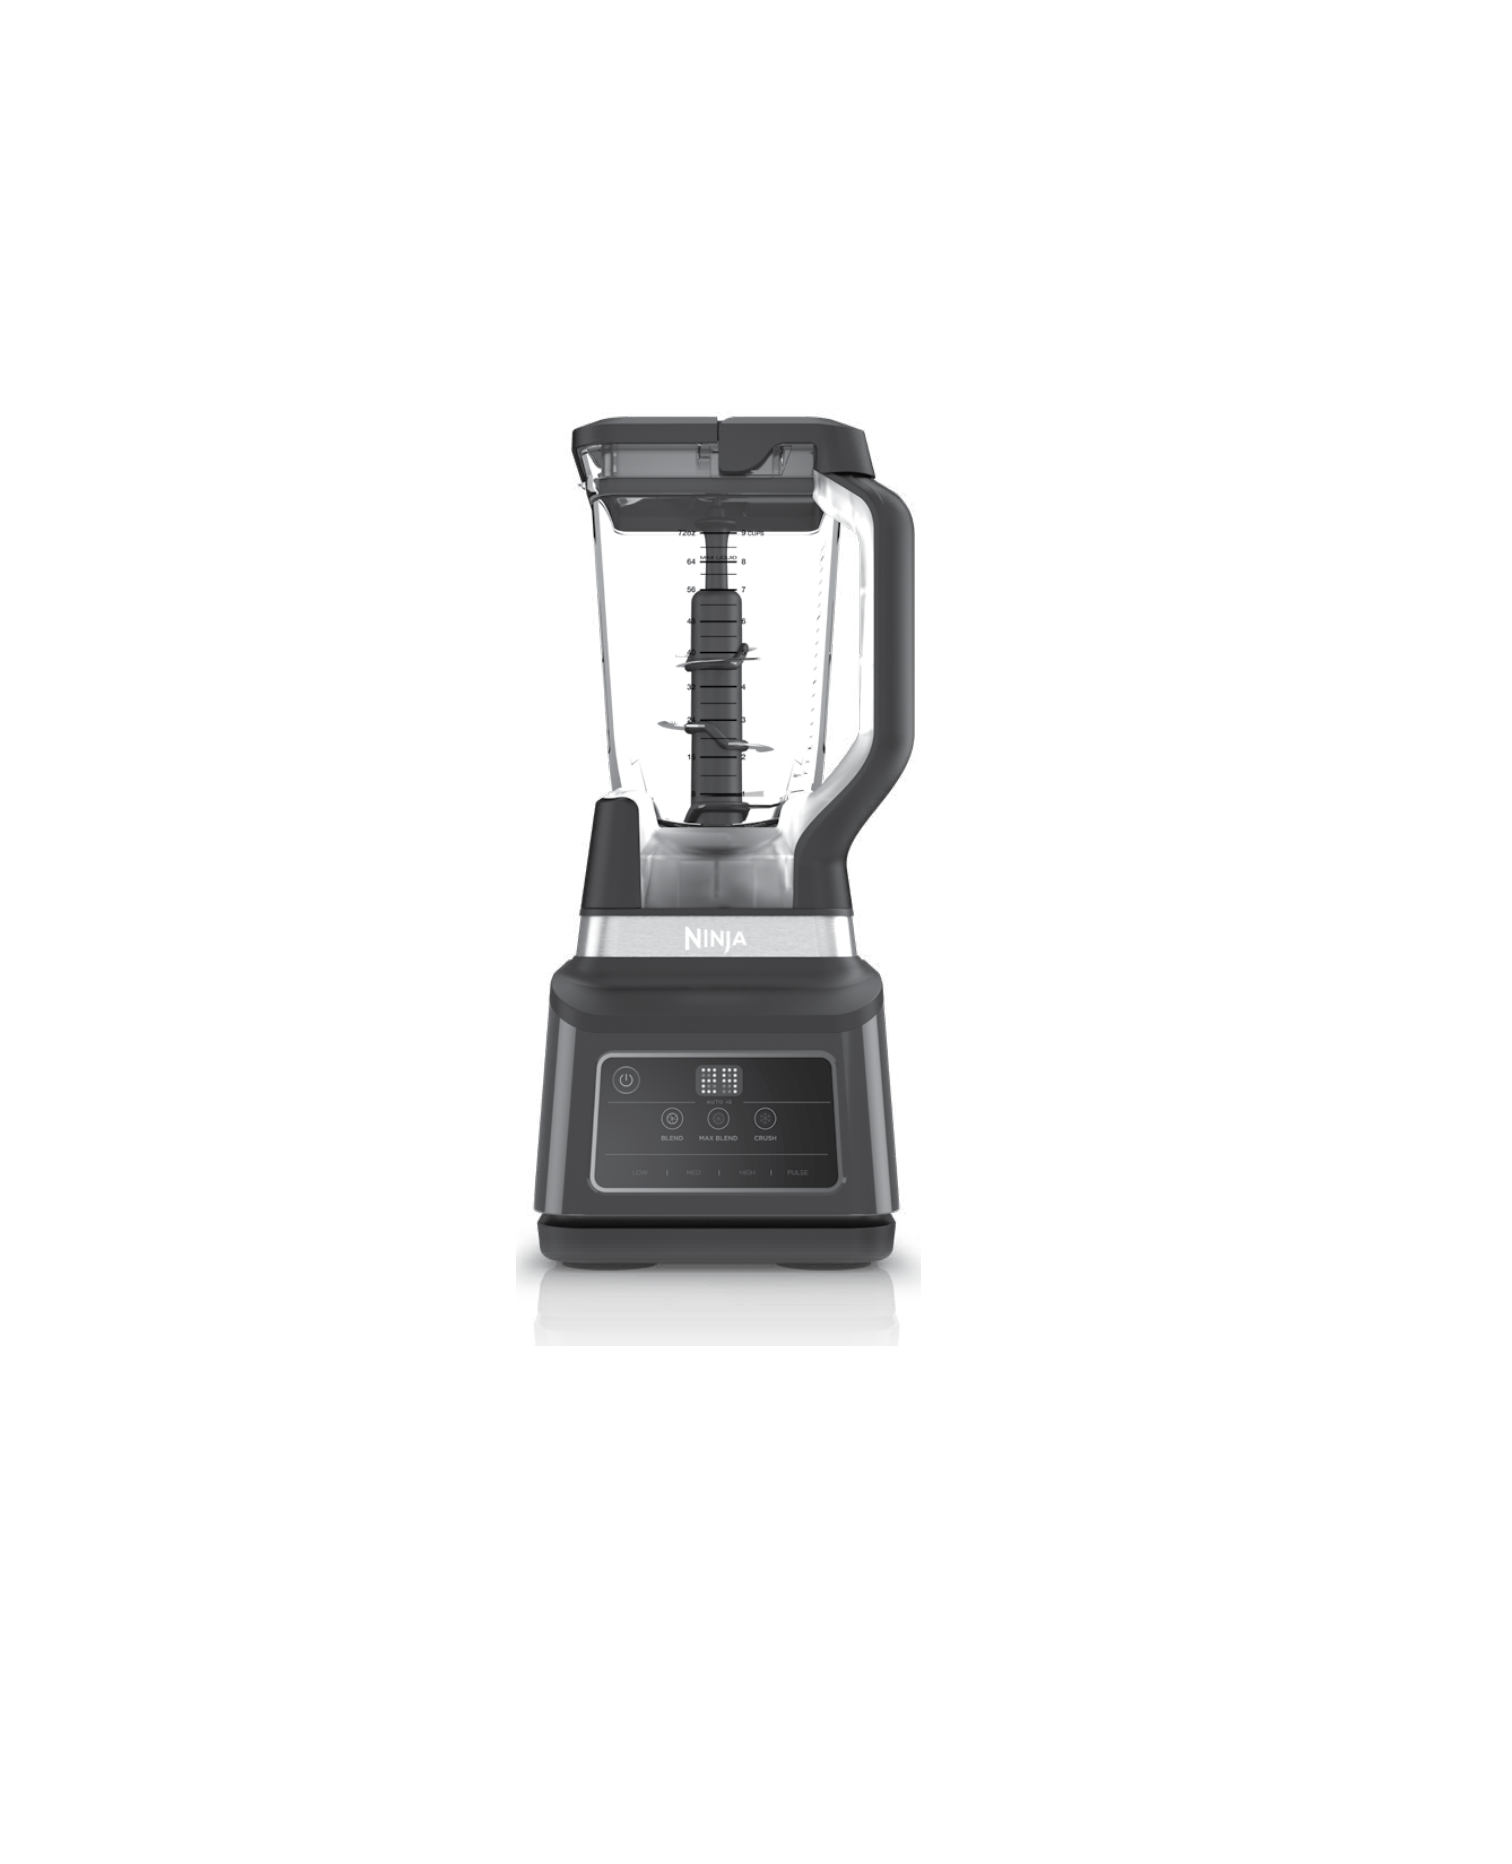 NINJA 2 in 1 Blender with Auto-IQ Instructions